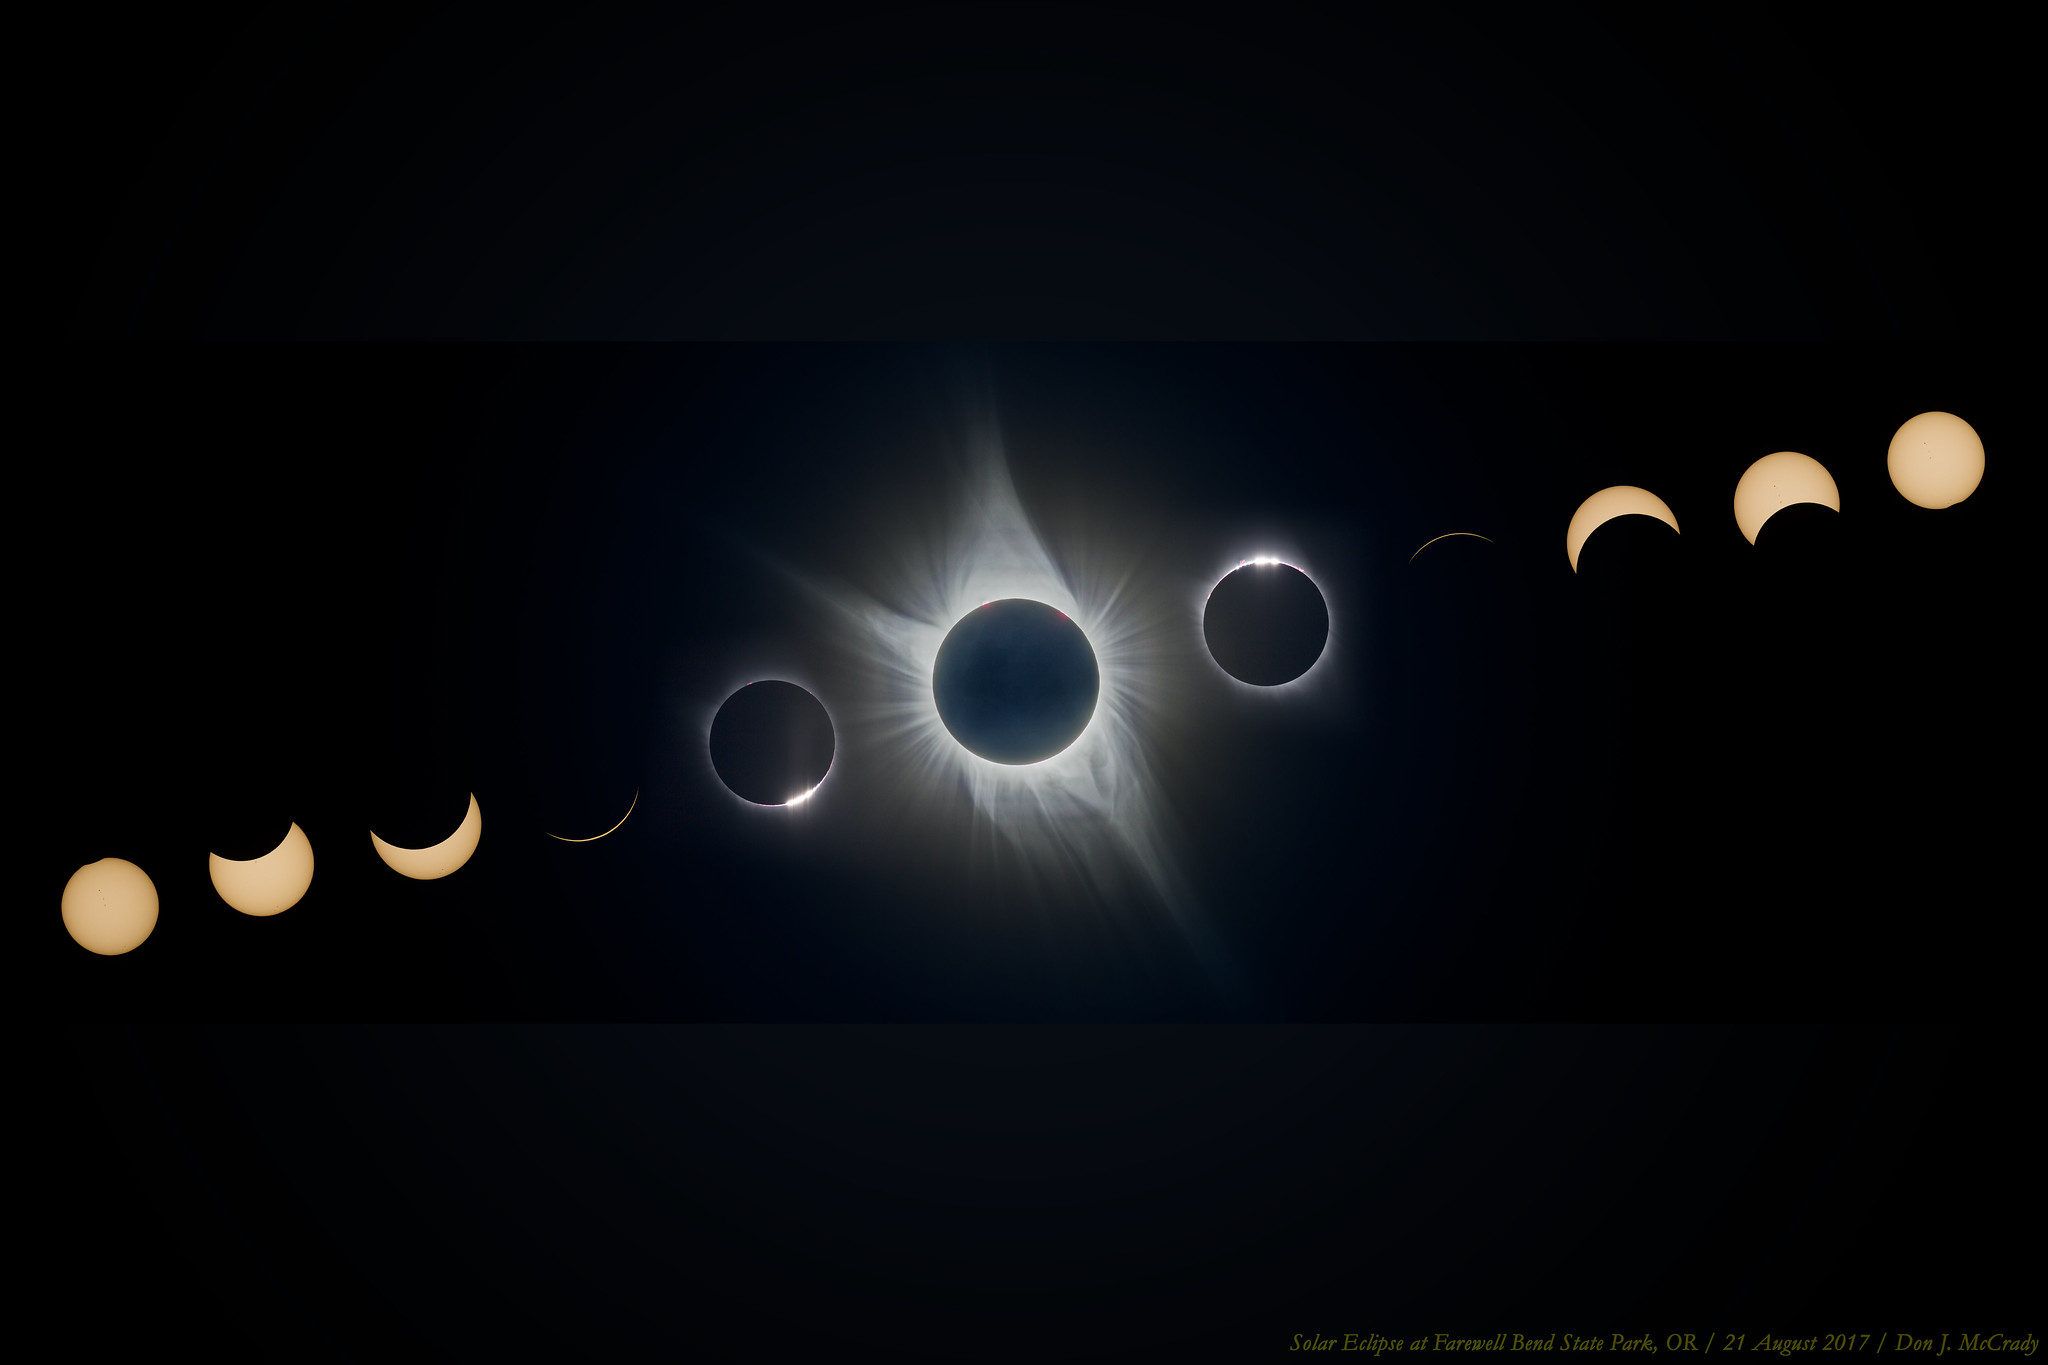 Phases of a solar eclipse progression showing partial and total eclipse stages, measured over the course of a month.